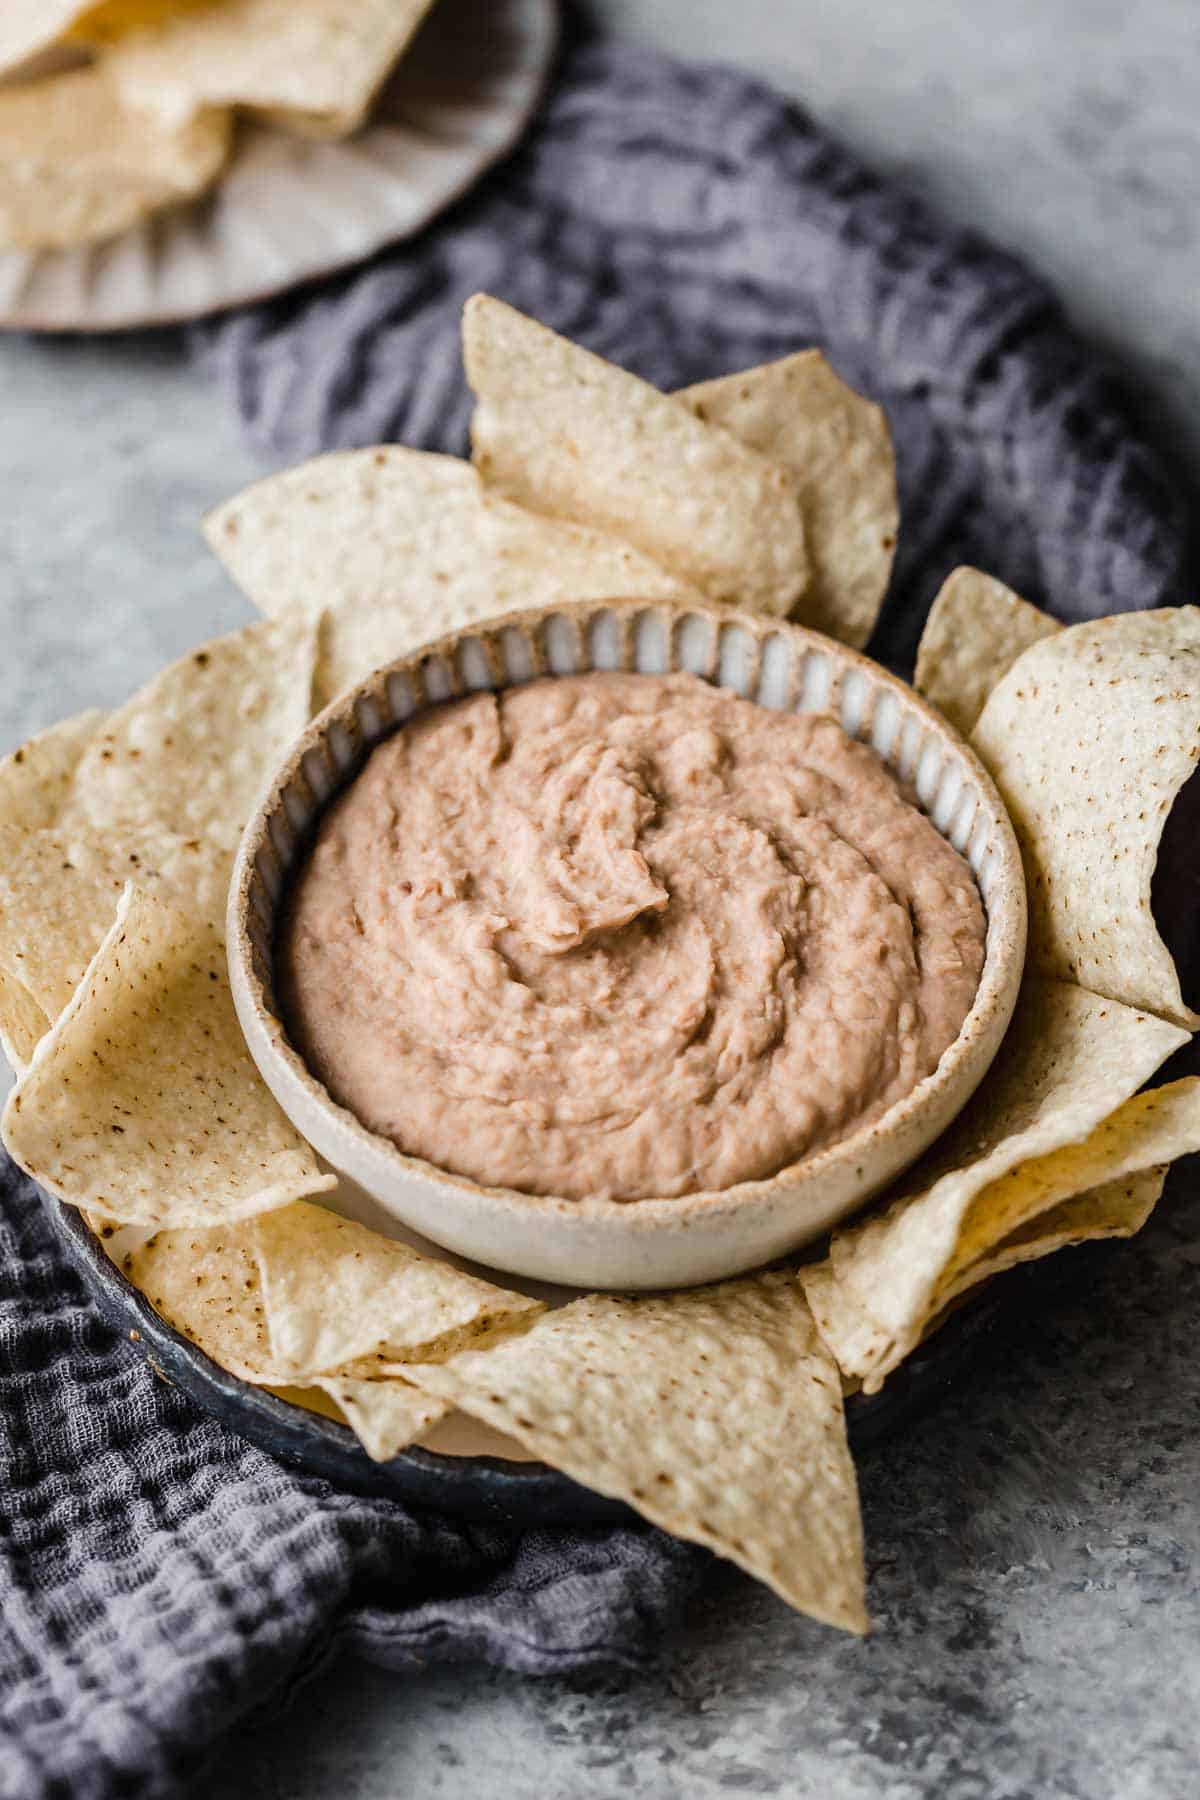 Crock pot refried beans in a handmade ceramic bowl with tortilla chips surrounding the bowl.